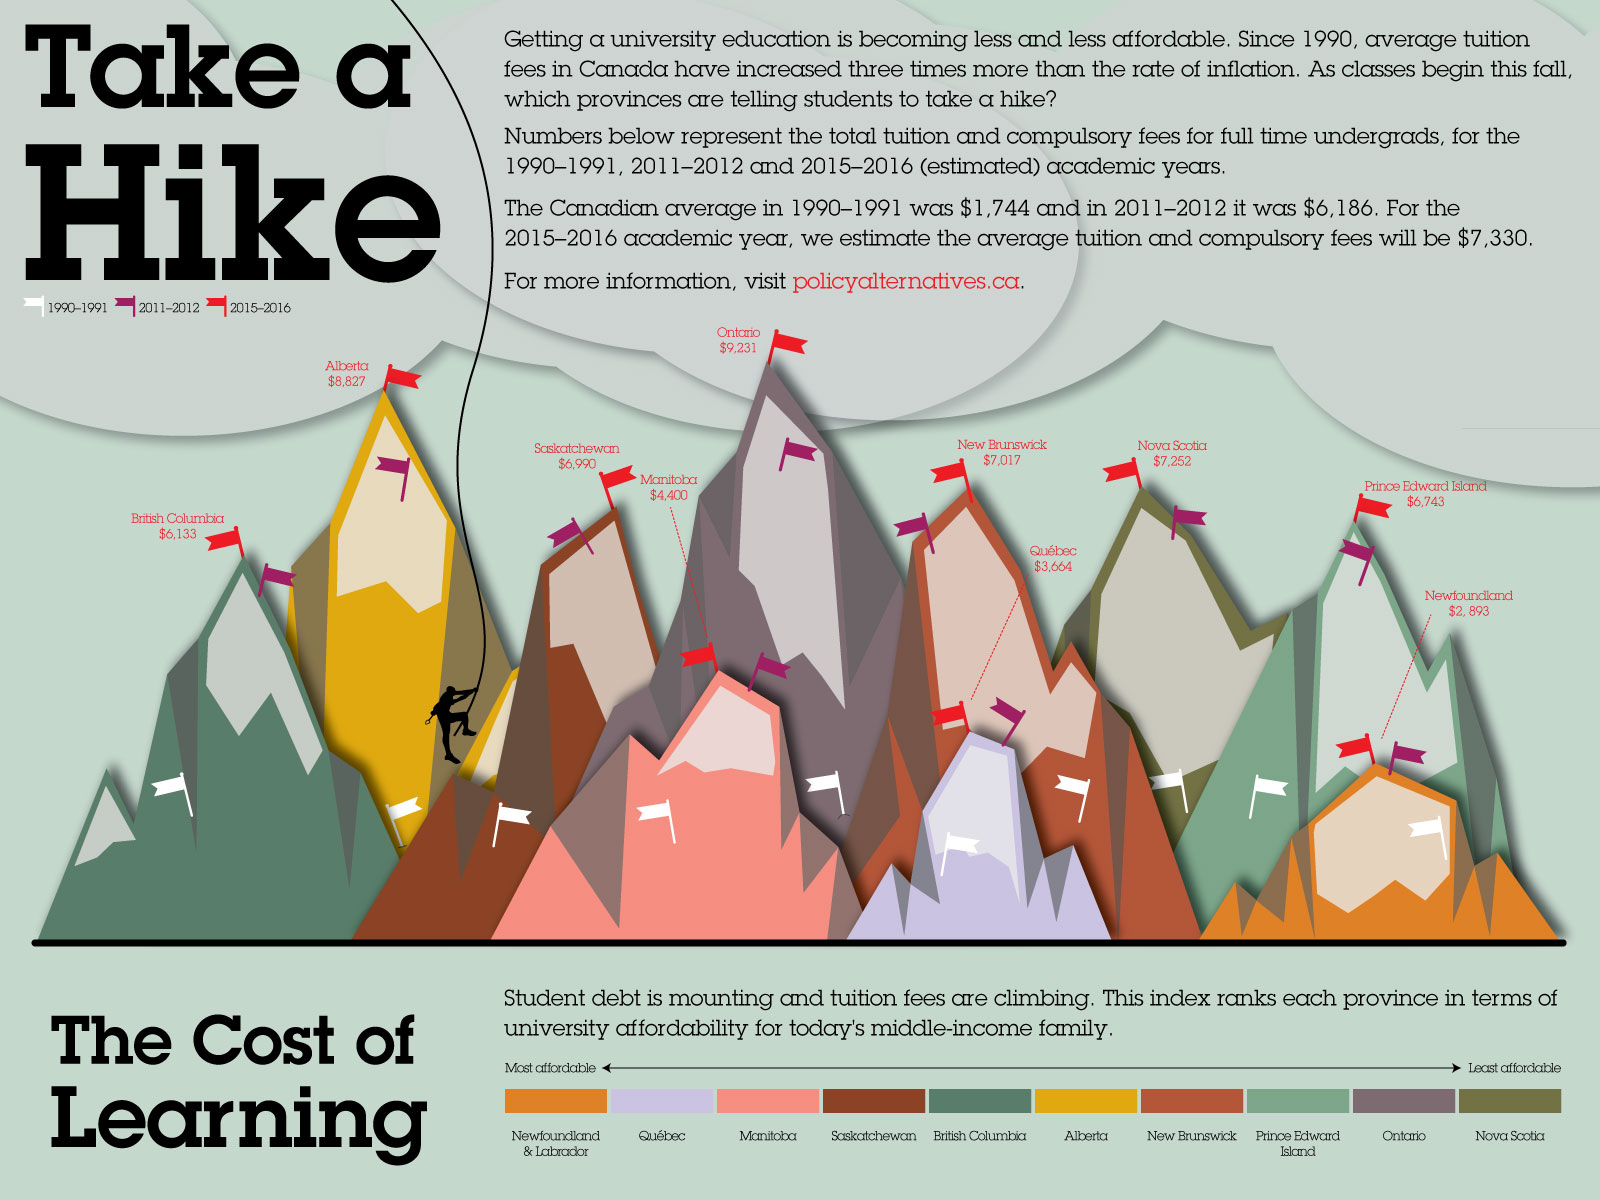 Infographic: Take a Hike! From Canadian Centre for Policy Alternatives (CCPA)